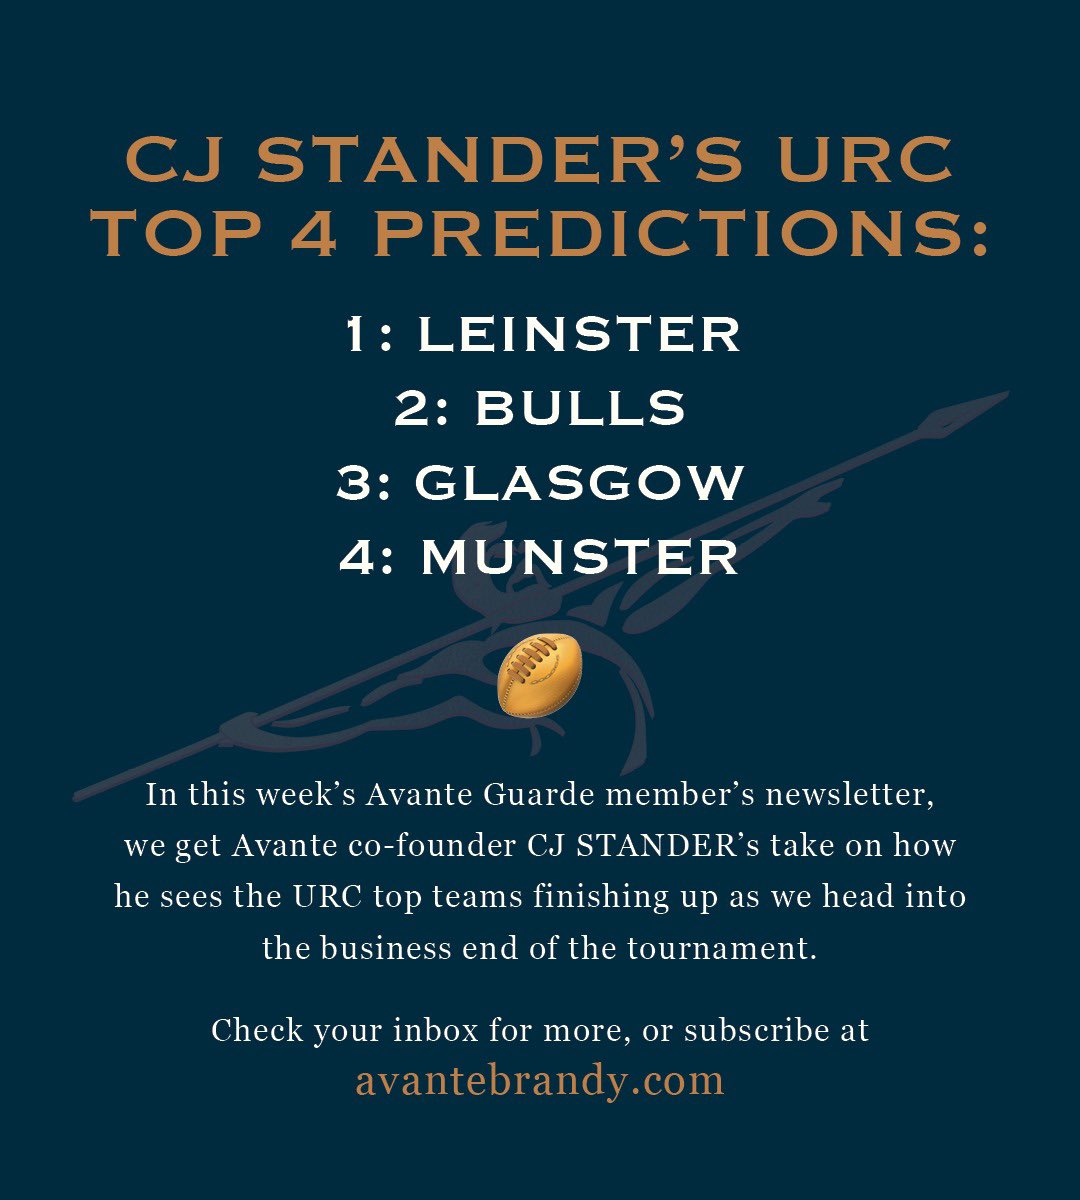 In this week's Avante Guarde members newsletter, we got co-founder @CJStander 's take on how he sees the URC finishing up as we hit the bizniz end of the tournament Check your inbox for more, or subscribe at avantebrandy.com #AvanteBrandy #JoinOurTeam #AvanteGuarde #URC